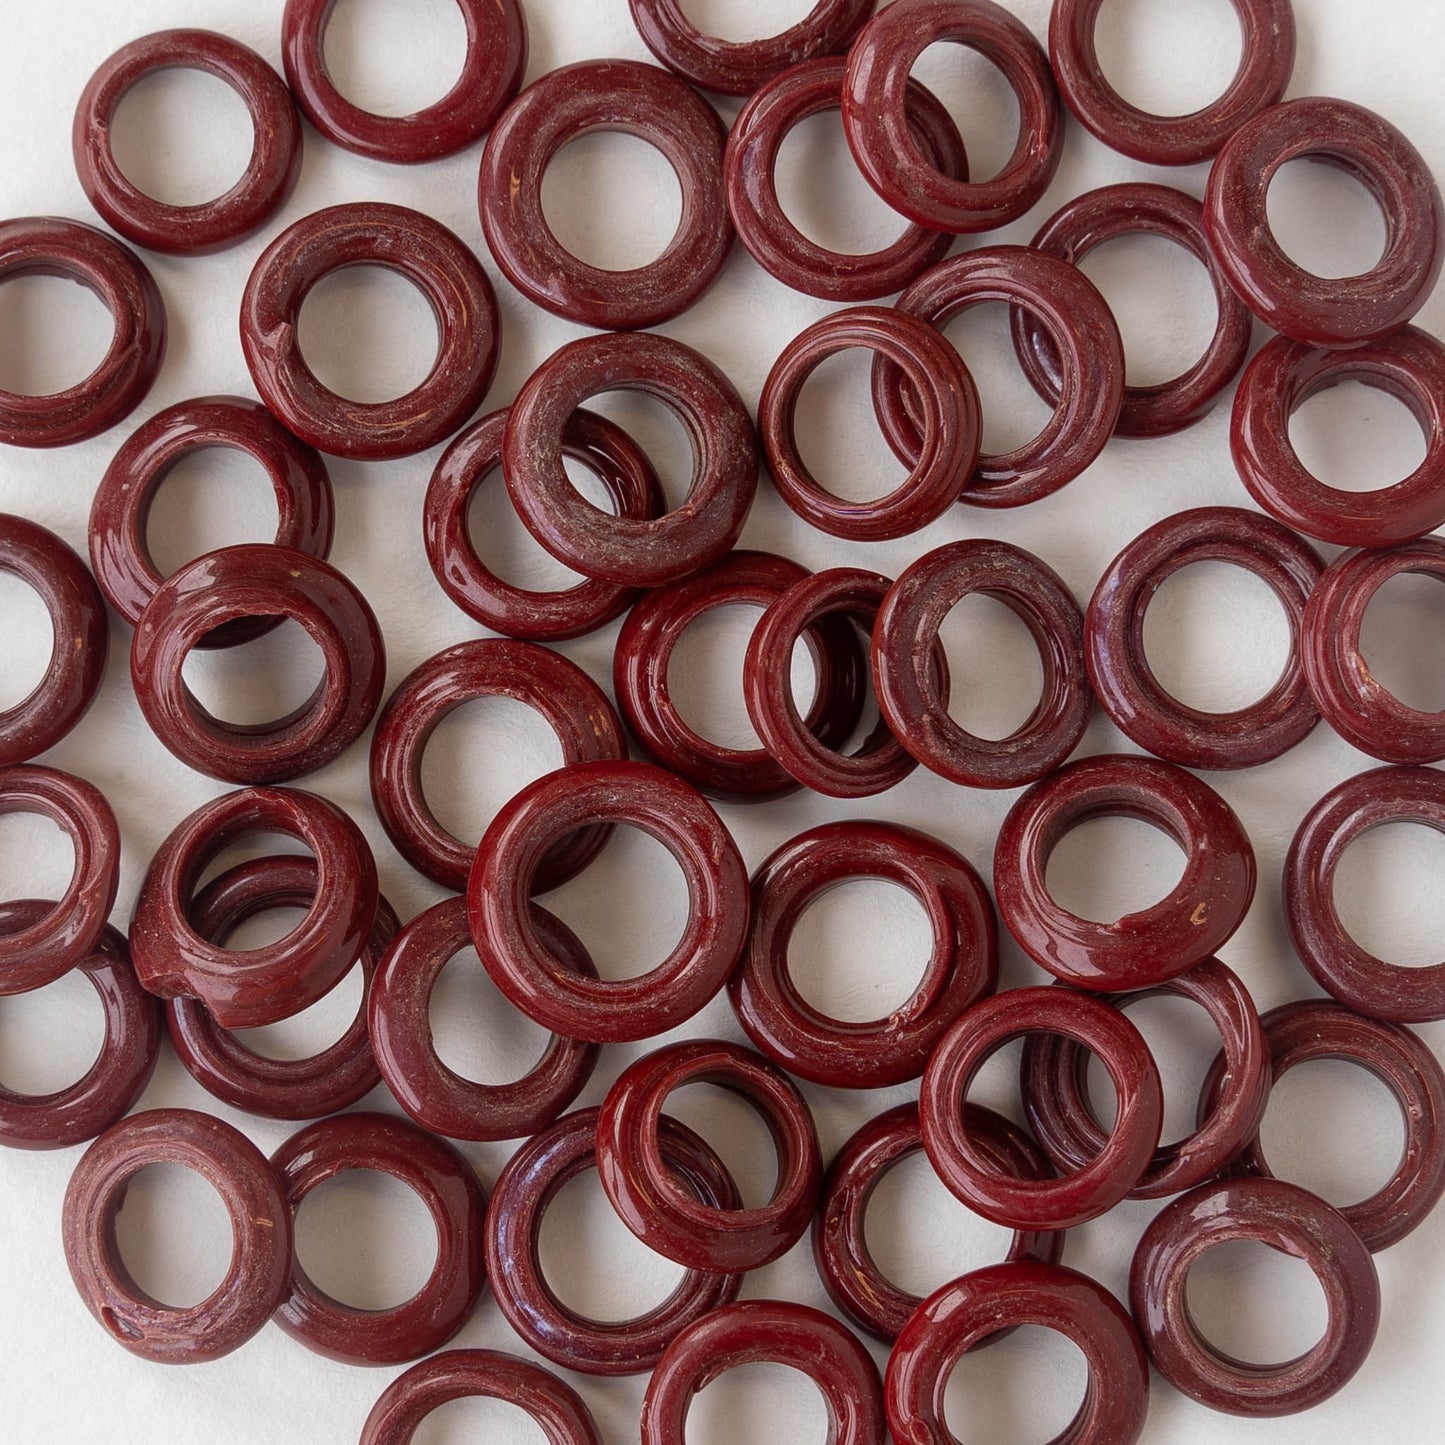 Handmade Glass Rings From Venice Italy - Opaque Dark Red - 20 beads